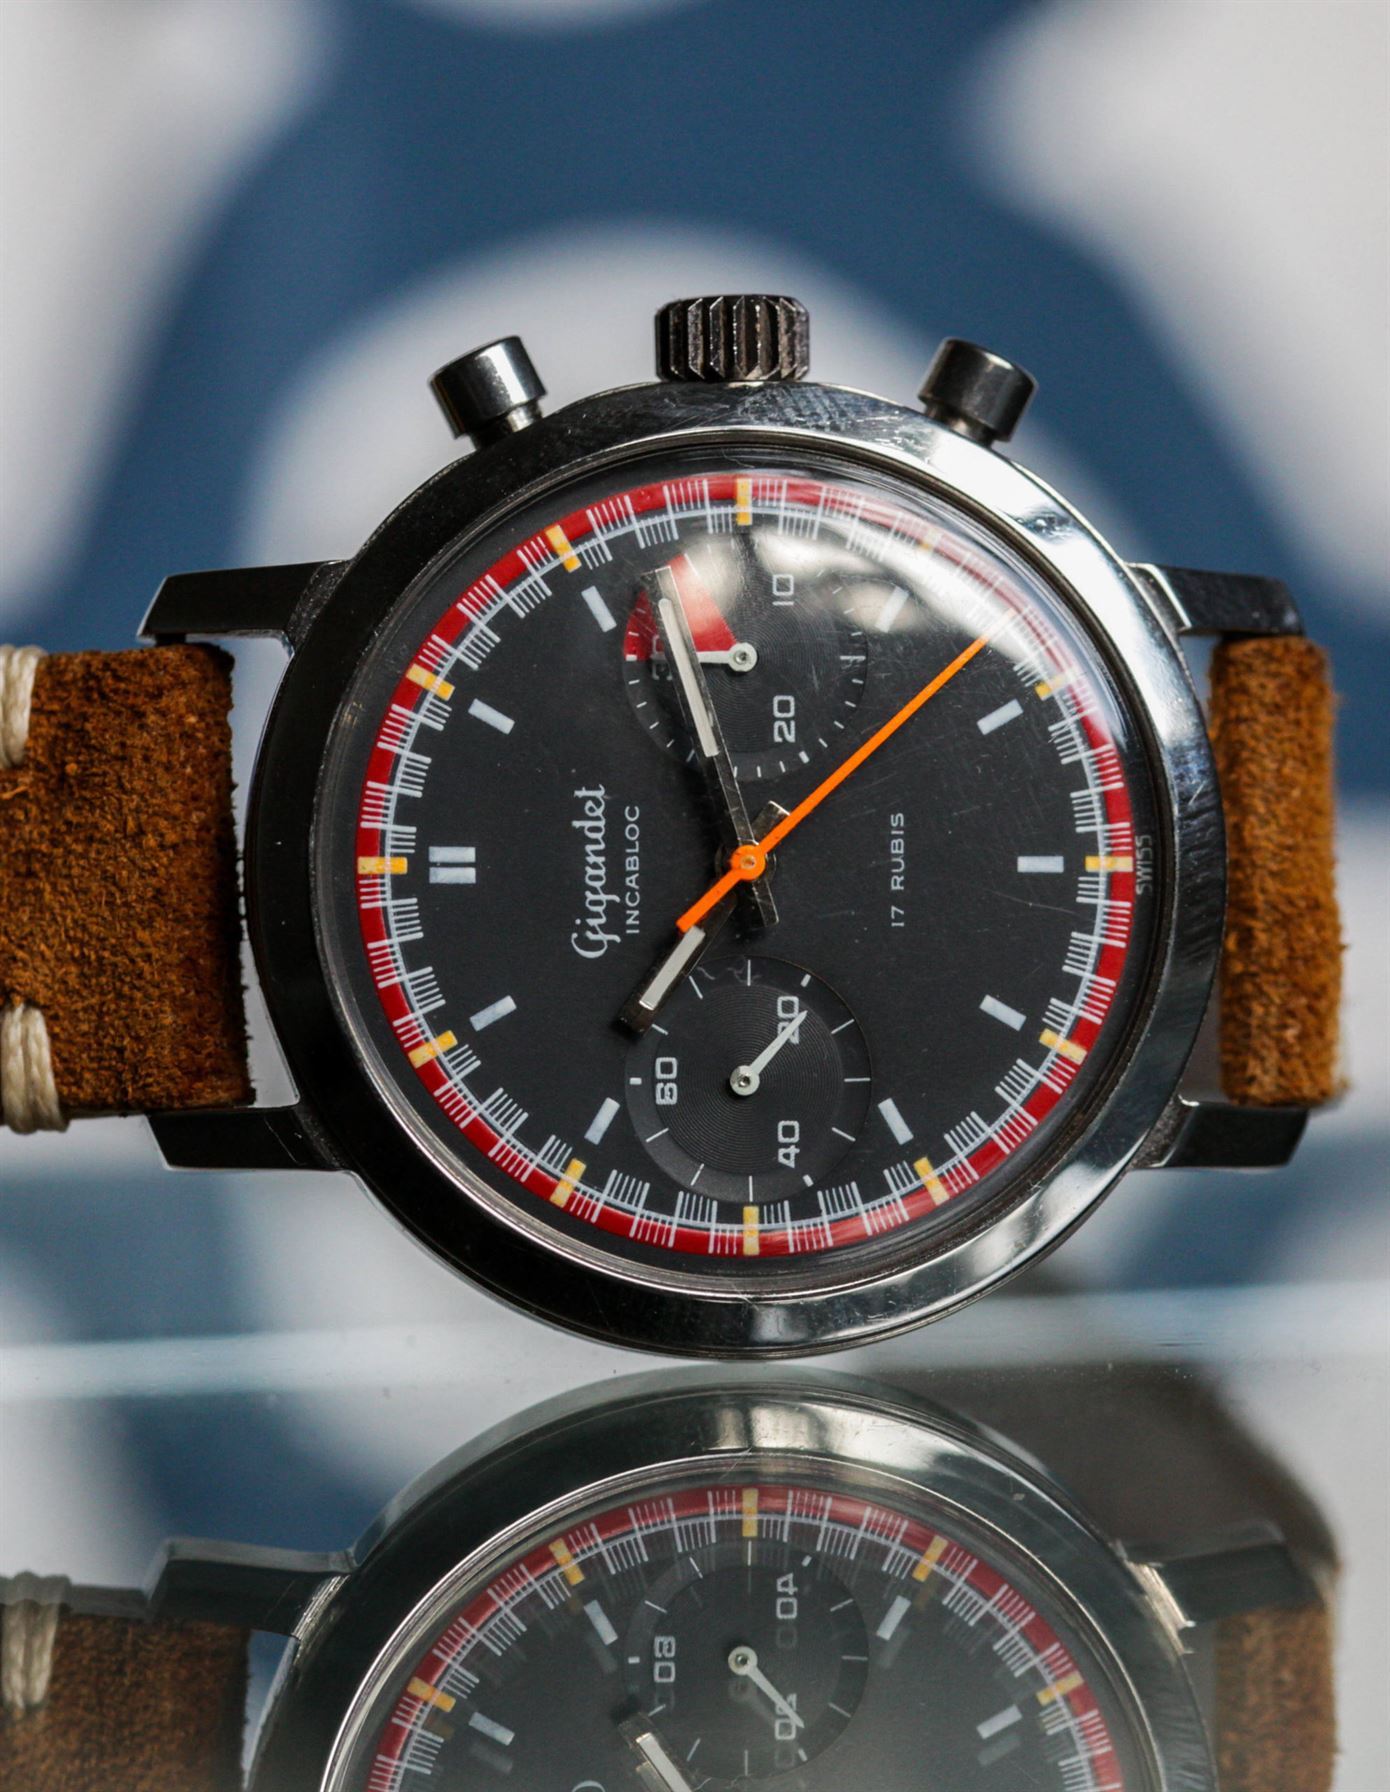 Gigandet Racing Chronograph - Menta Watches- Buy Vintage and